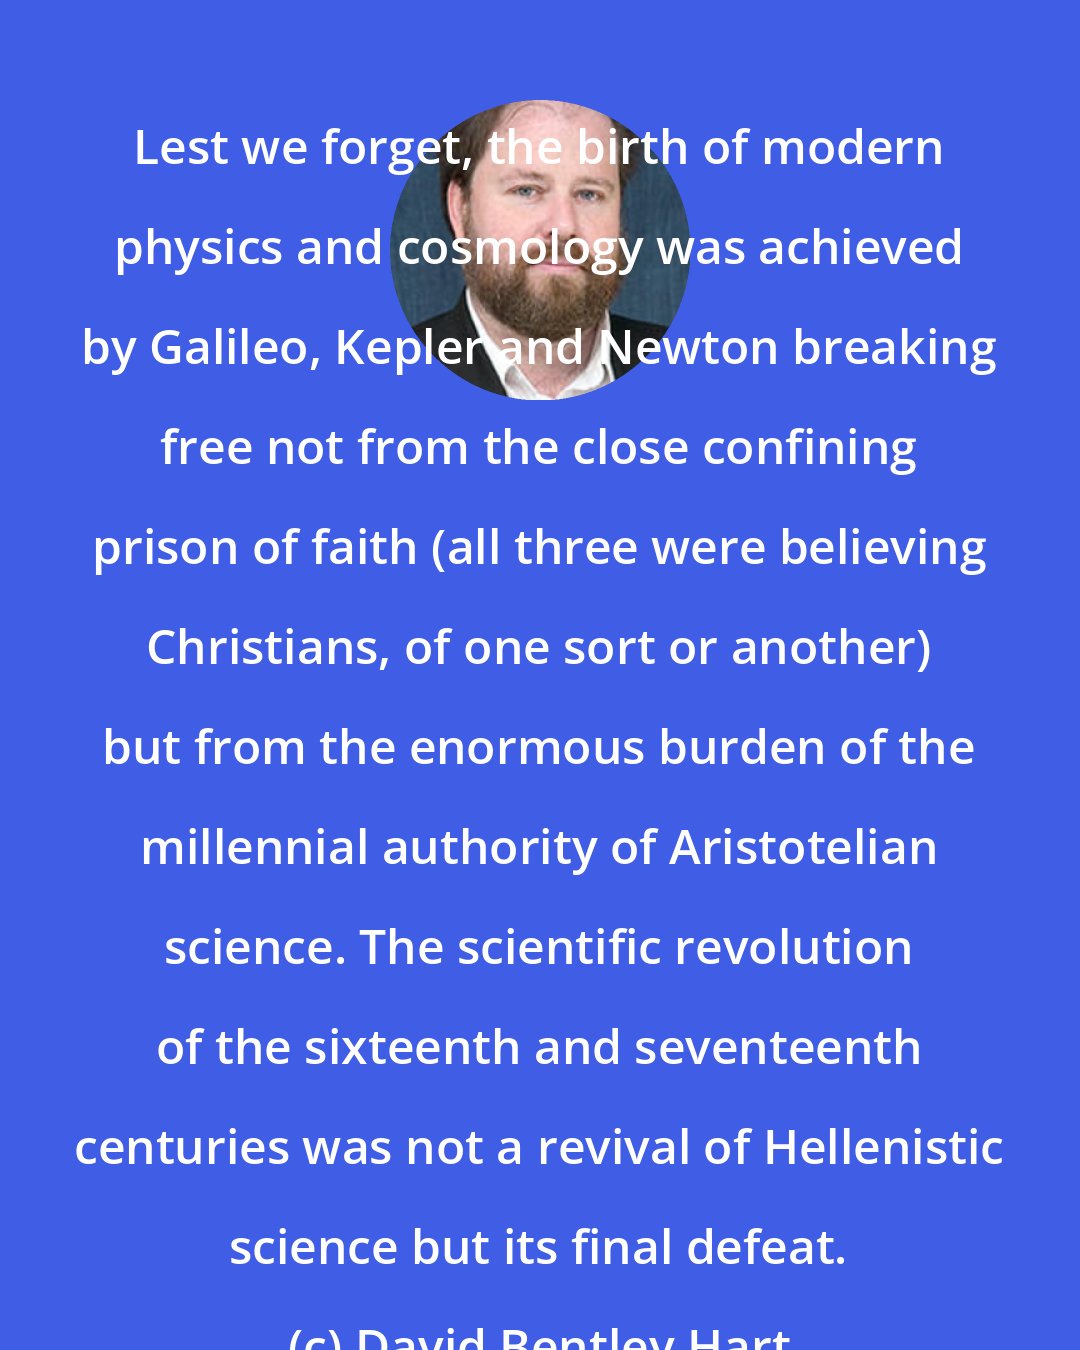 David Bentley Hart: Lest we forget, the birth of modern physics and cosmology was achieved by Galileo, Kepler and Newton breaking free not from the close confining prison of faith (all three were believing Christians, of one sort or another) but from the enormous burden of the millennial authority of Aristotelian science. The scientific revolution of the sixteenth and seventeenth centuries was not a revival of Hellenistic science but its final defeat.